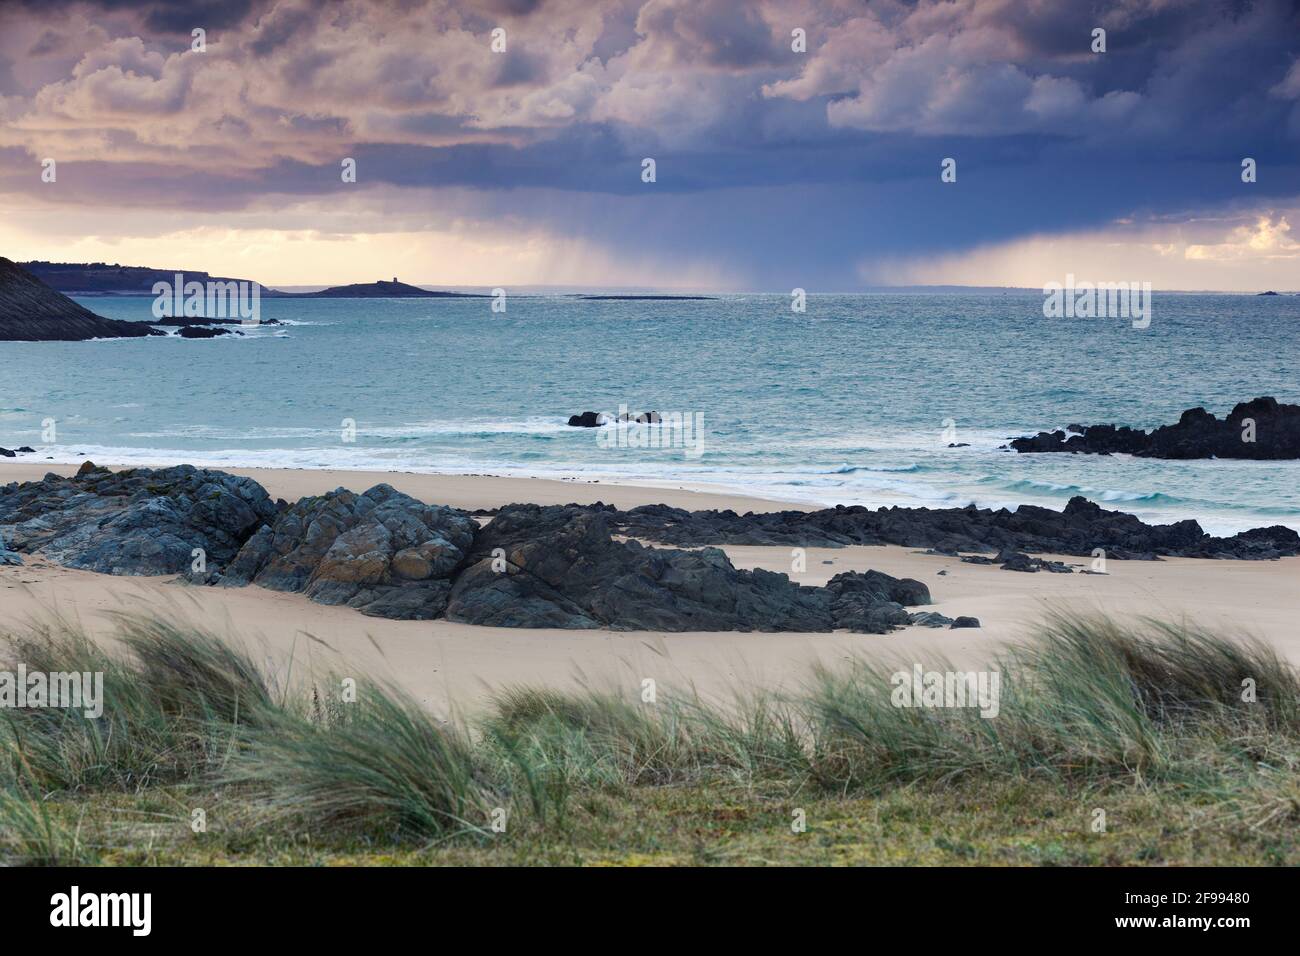 A storm is moving in the distance across the sea at Pleherel Plage, between Cap Frehel and the tidal island Ilot Michel. Brittany, France Stock Photo